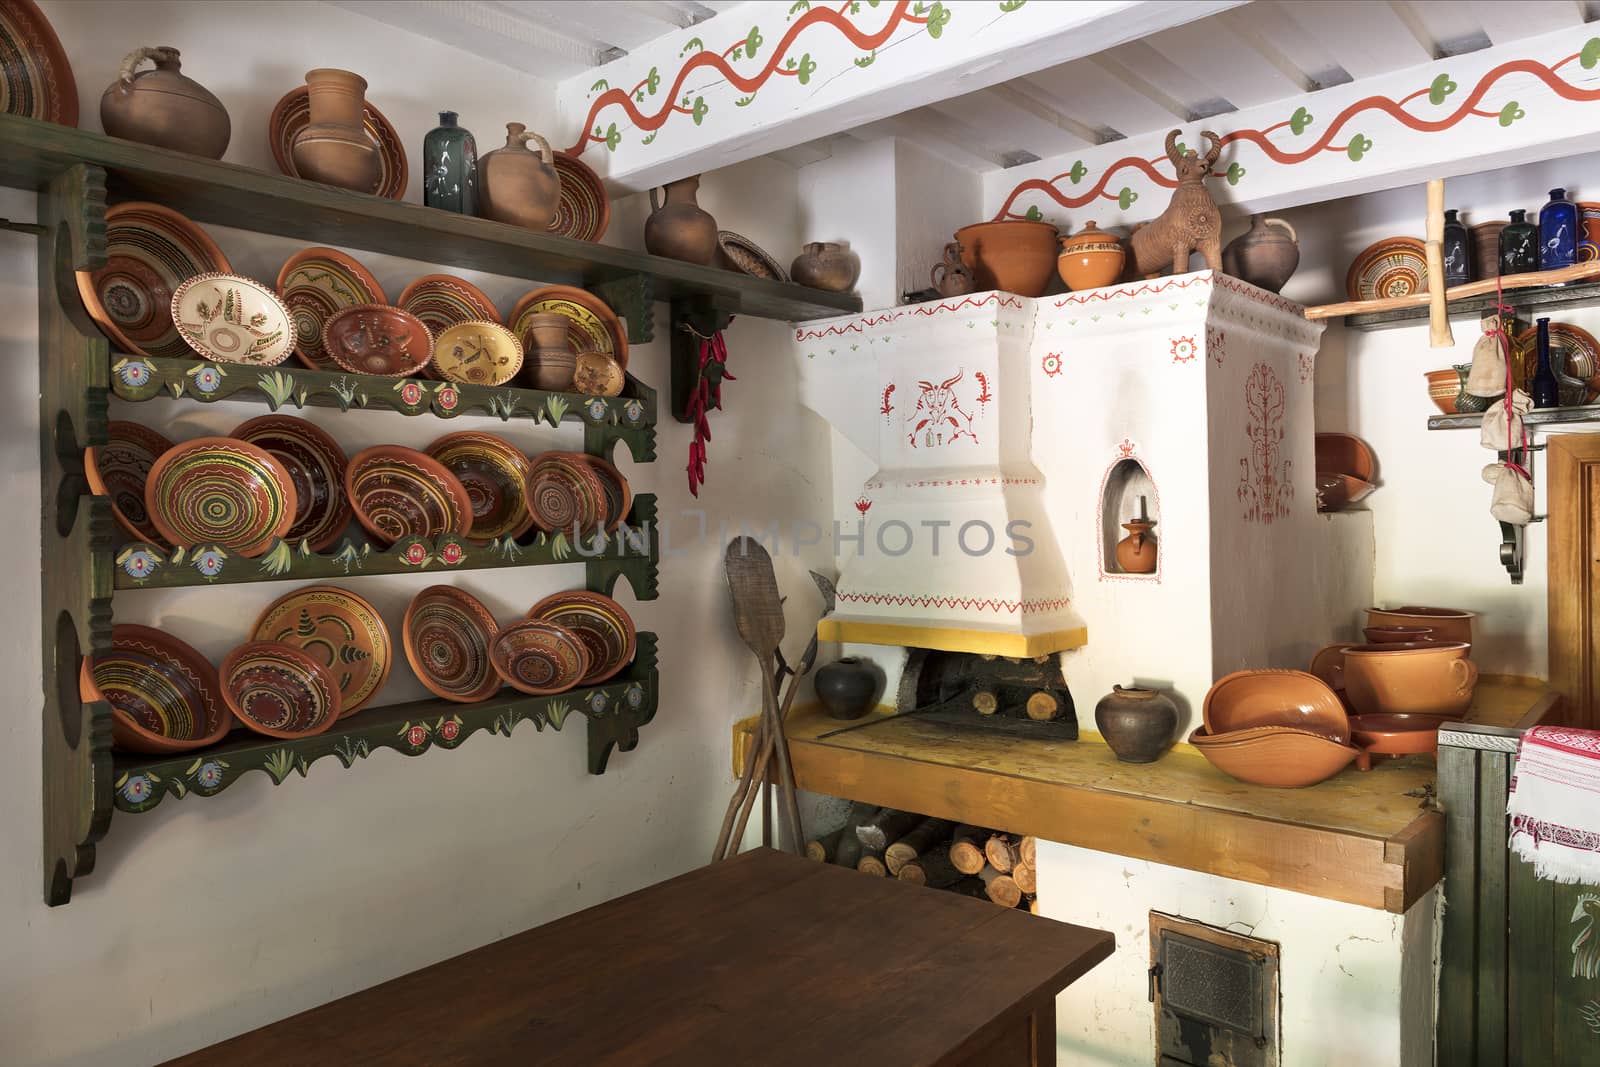 Design of an old oven and kitchen ware in an old Ukrainian farmhouse. by Sergii